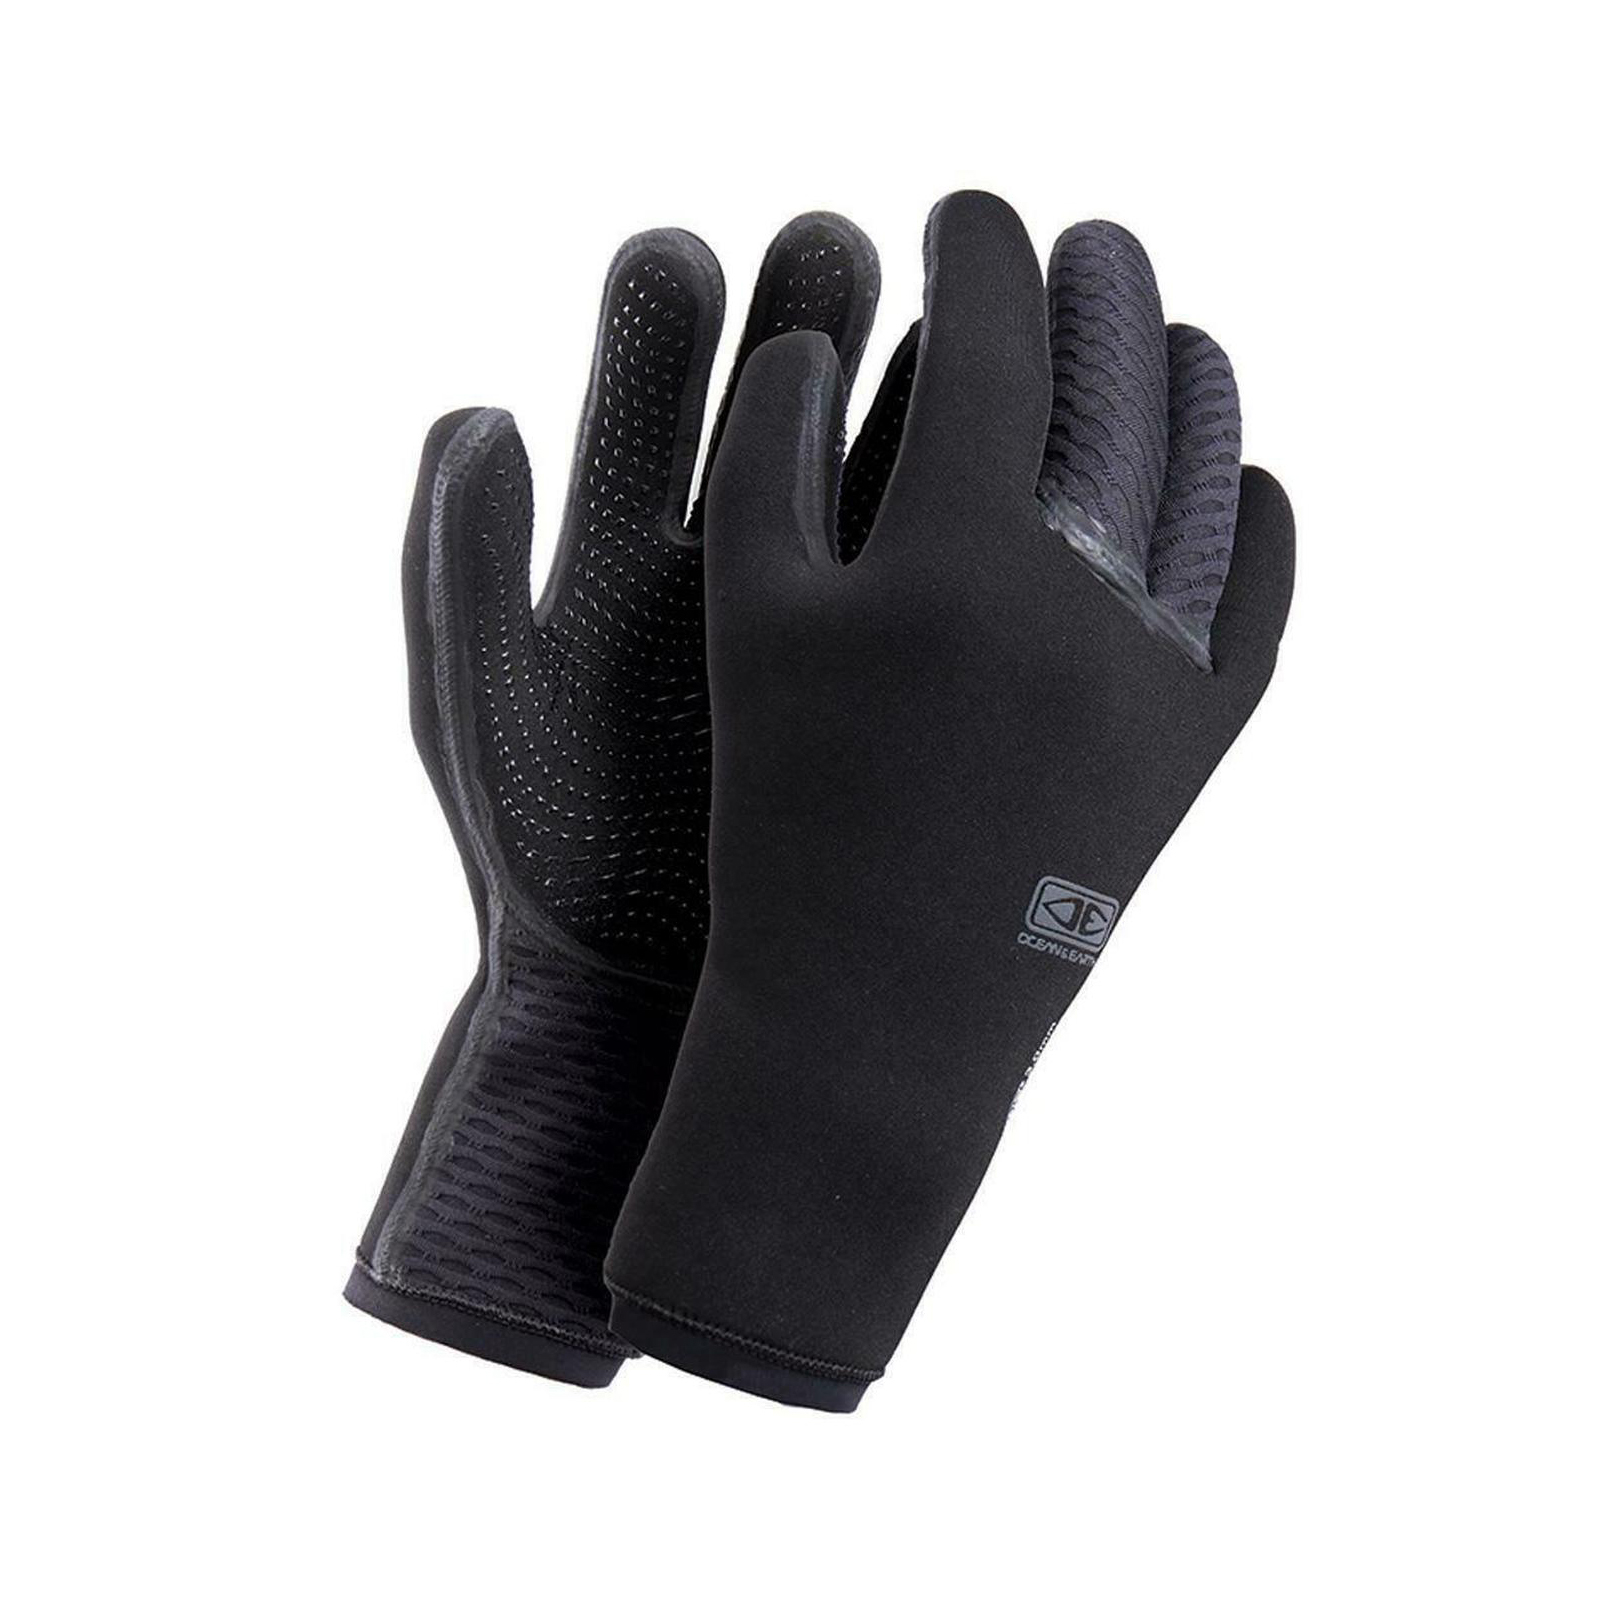 Ocean & Earth One Dry Seal 3mm Neo Gloves